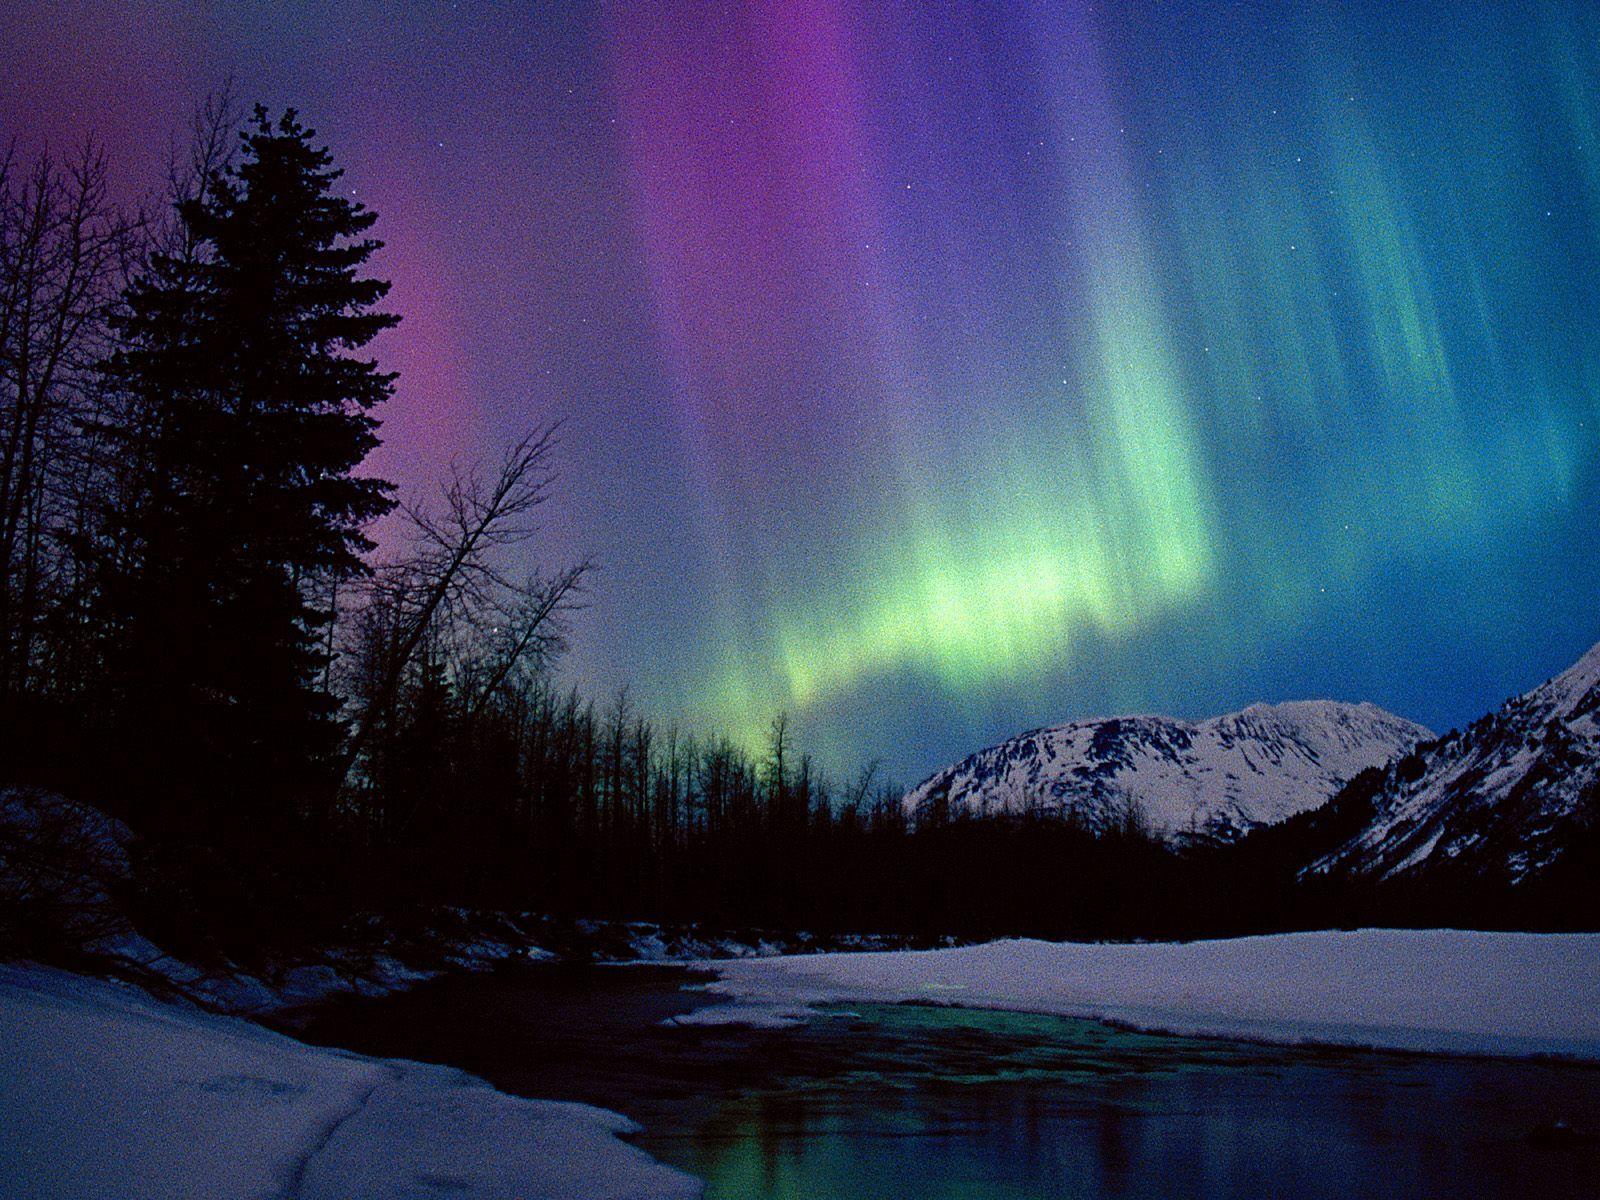 I've always wanted to see the northern lights in Alaska. So